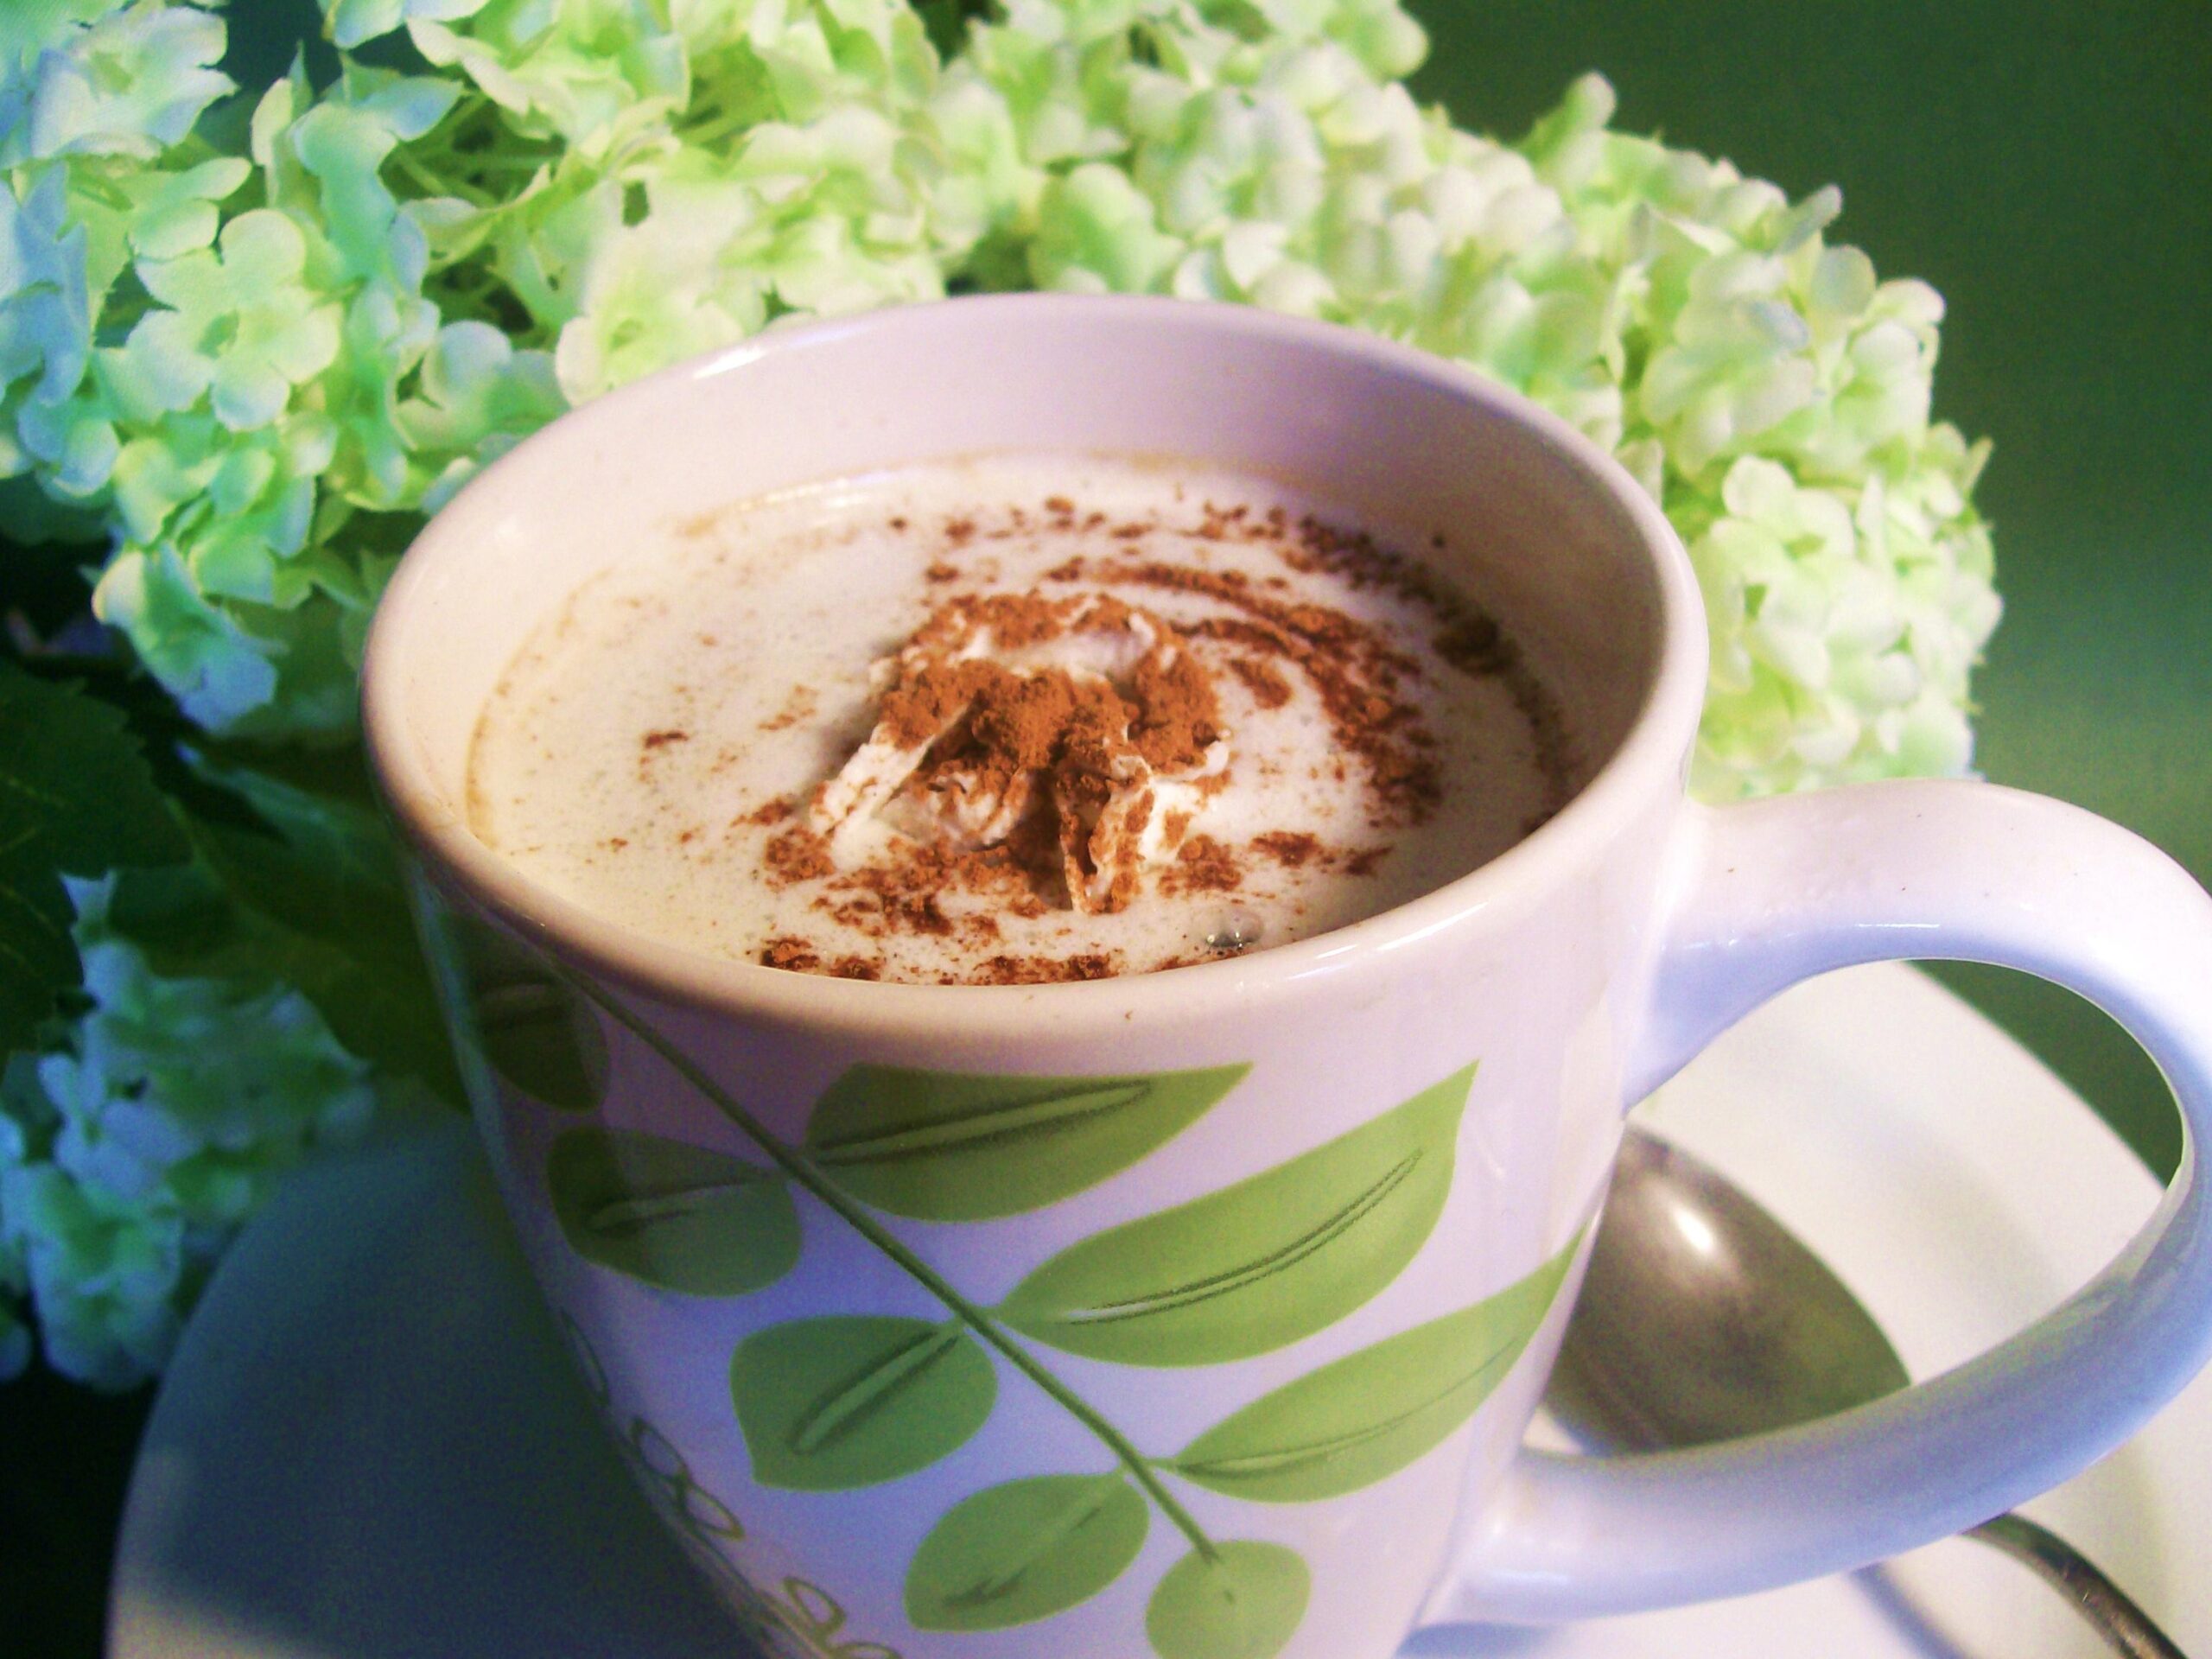  Don't settle for a regular cup of coffee when you can indulge in this creamy caramel blend.